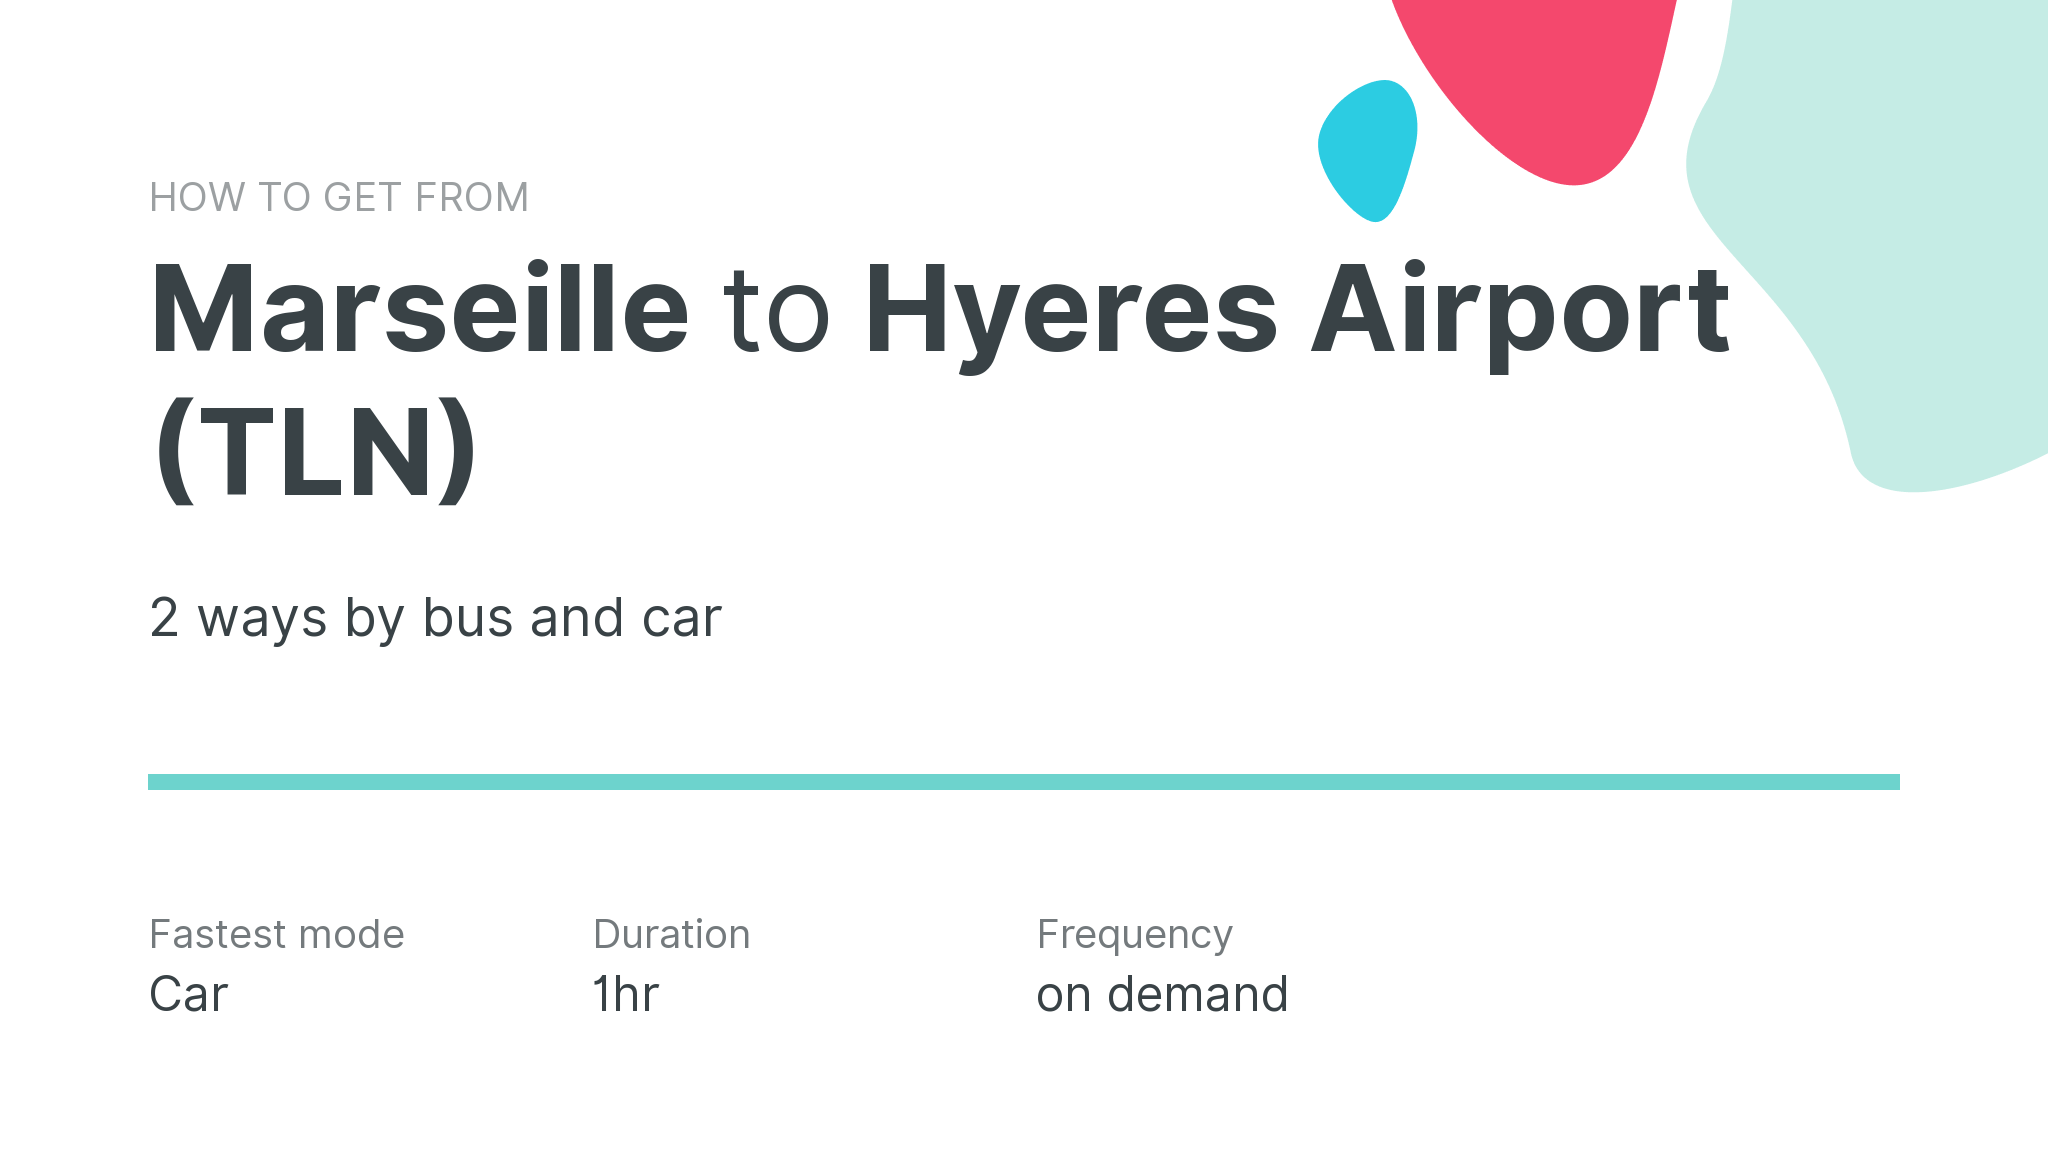 How do I get from Marseille to Hyeres Airport (TLN)